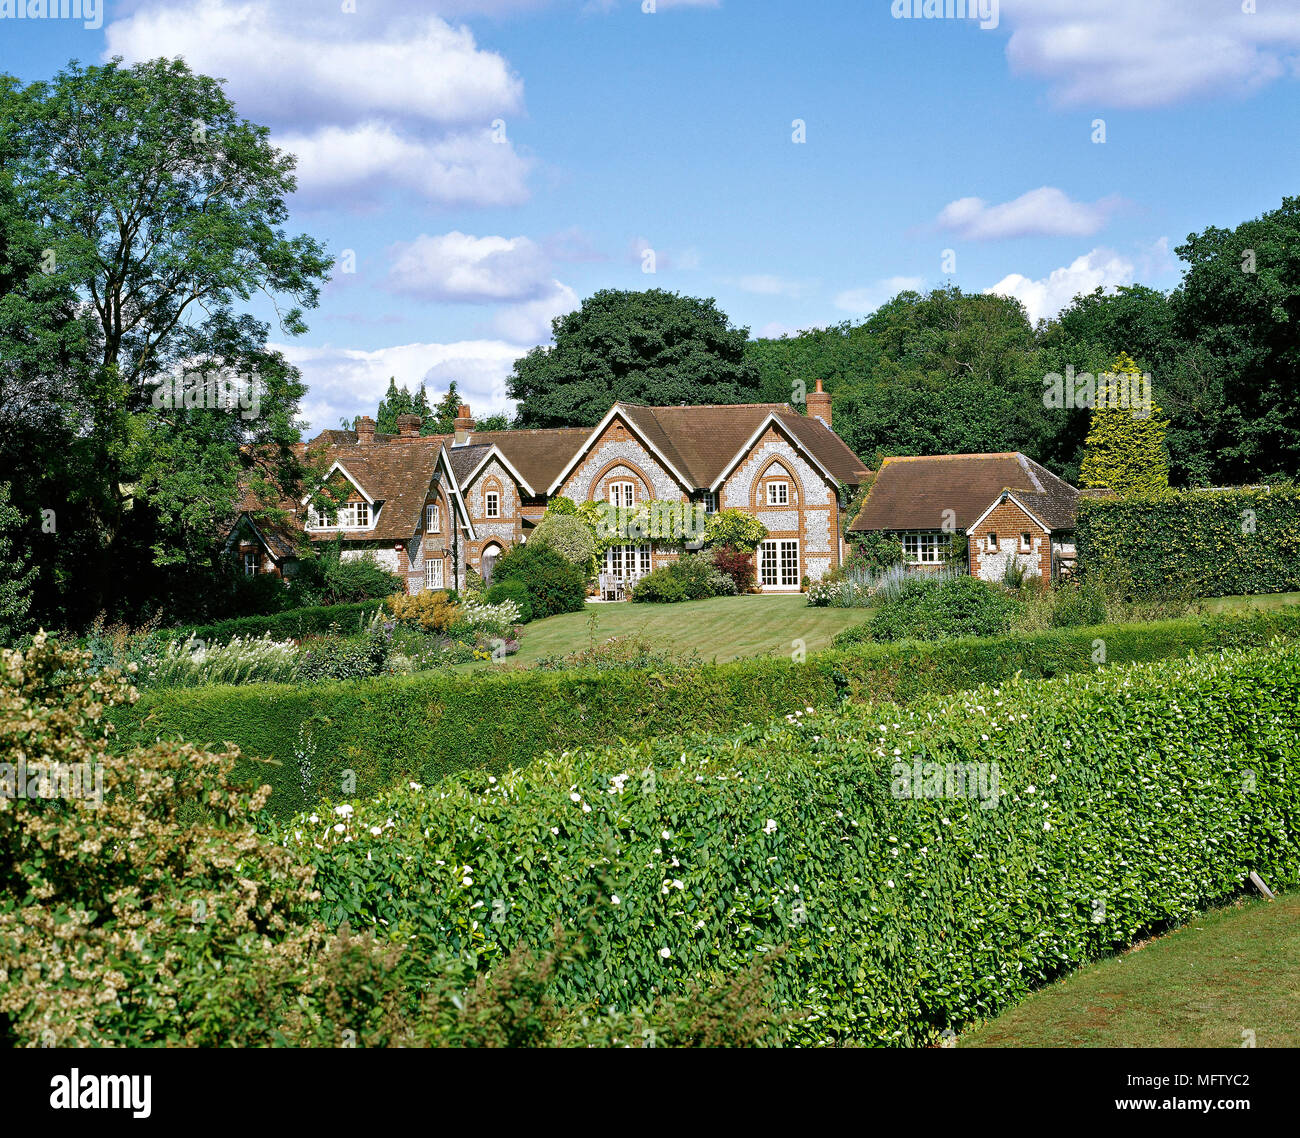 An exterior of a modern, detached country house, garden with hedging Stock Photo